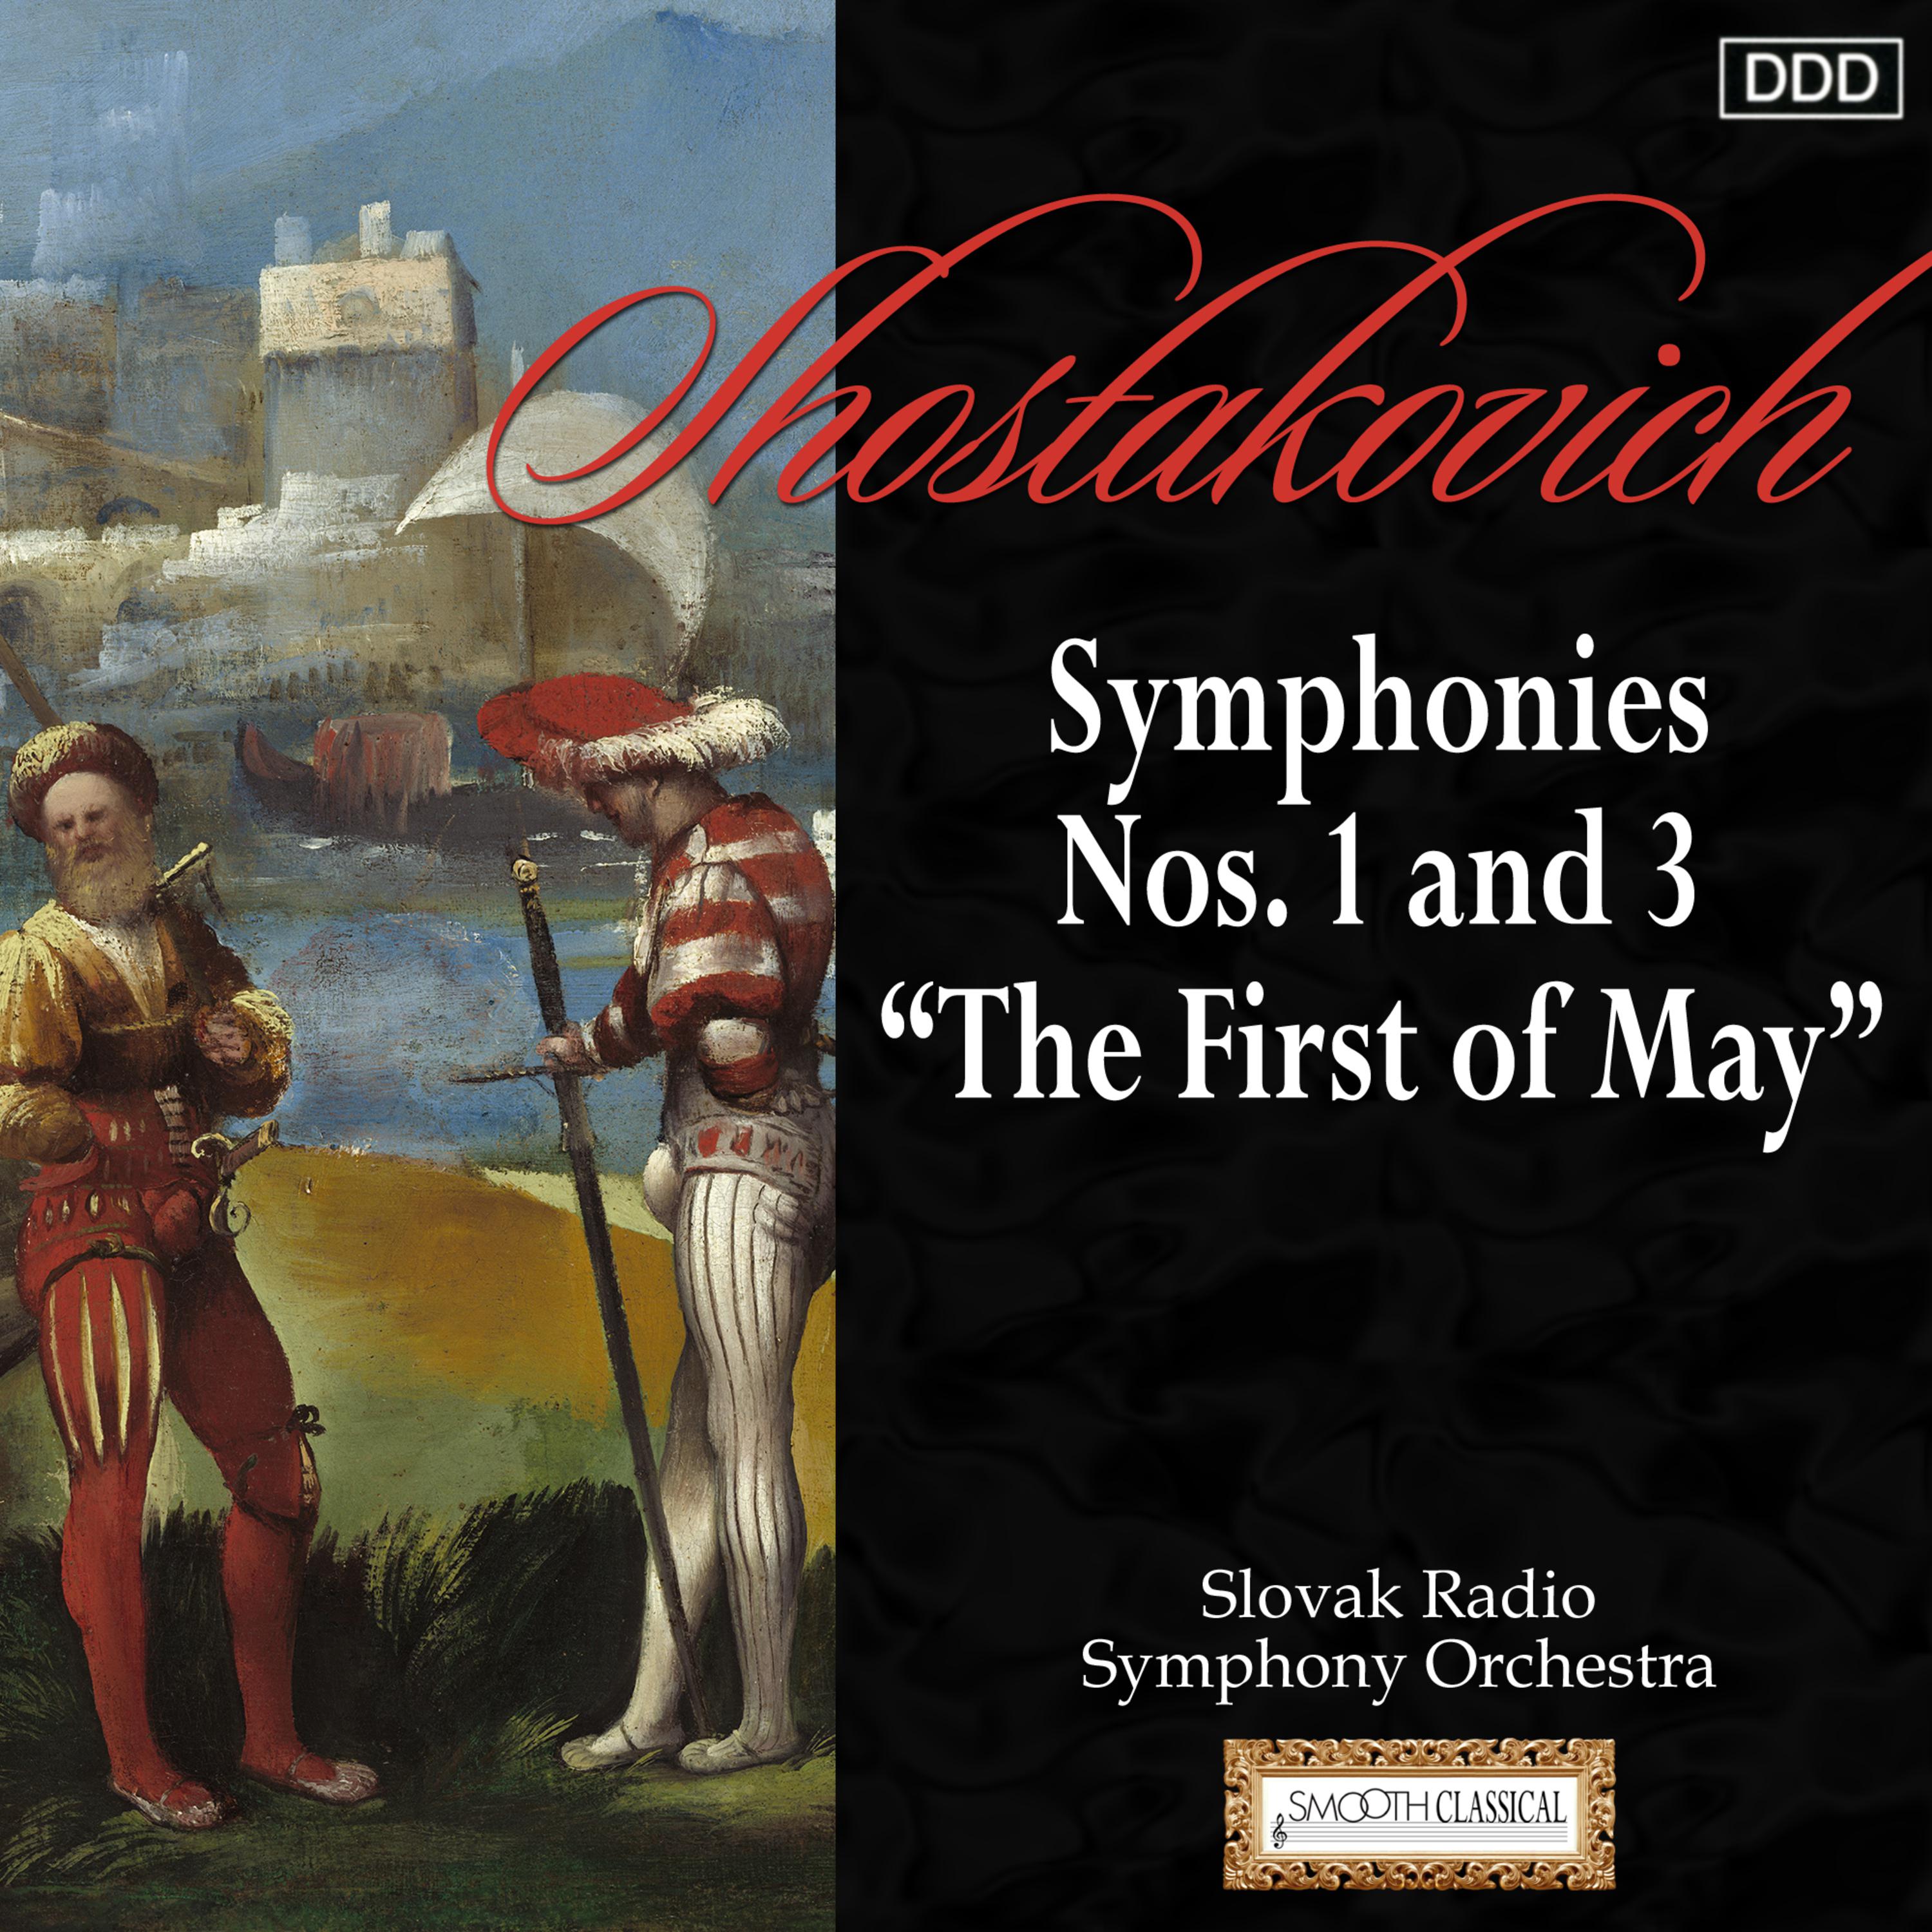 Shostakovich: Symphonies Nos. 1 and 3 "The First of May"